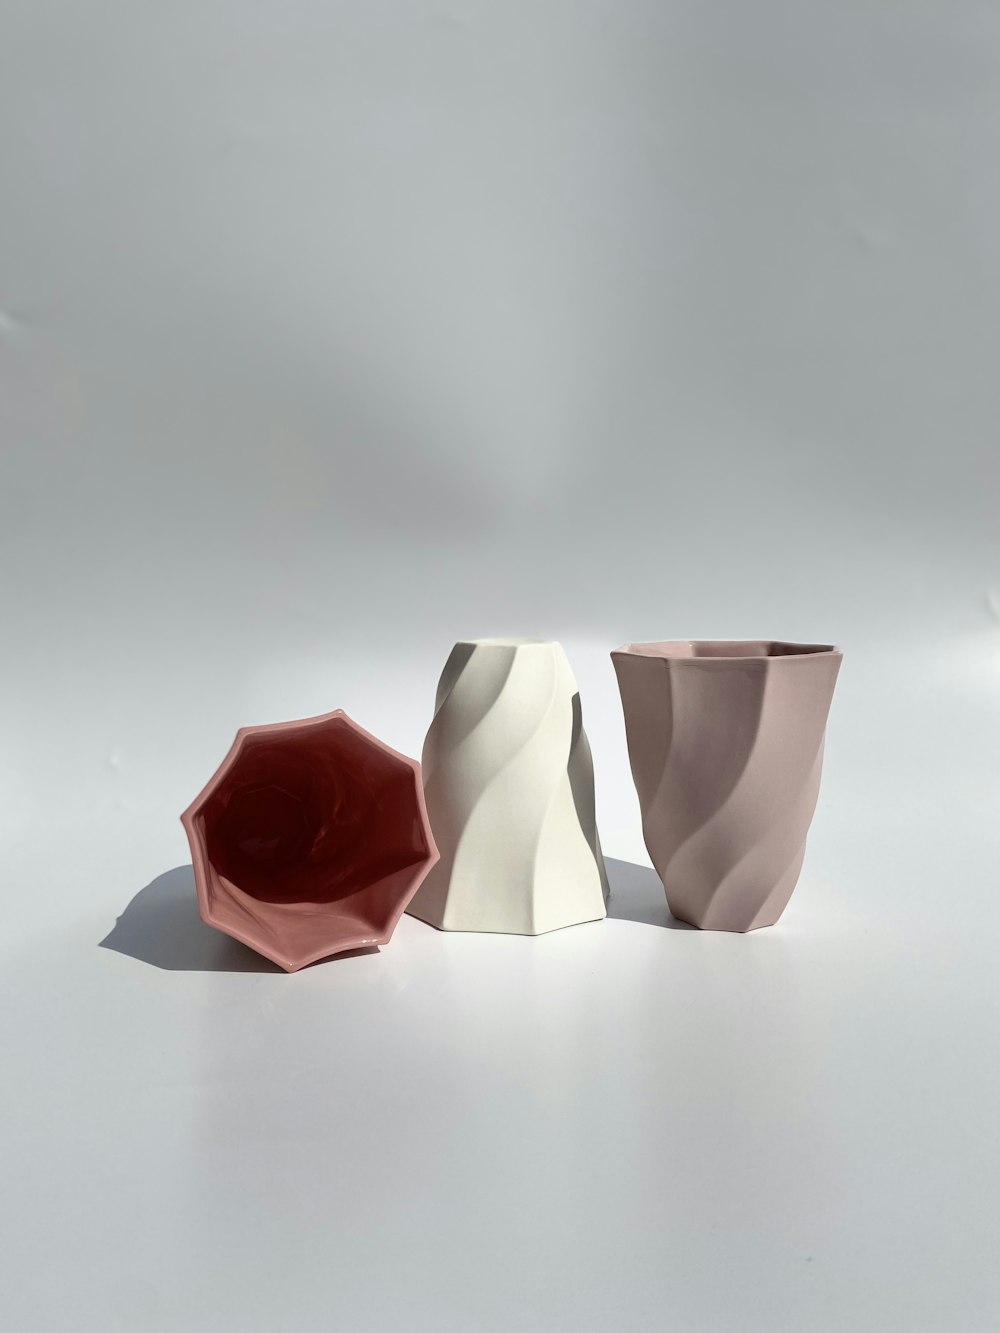 three different shapes of vases on a white surface